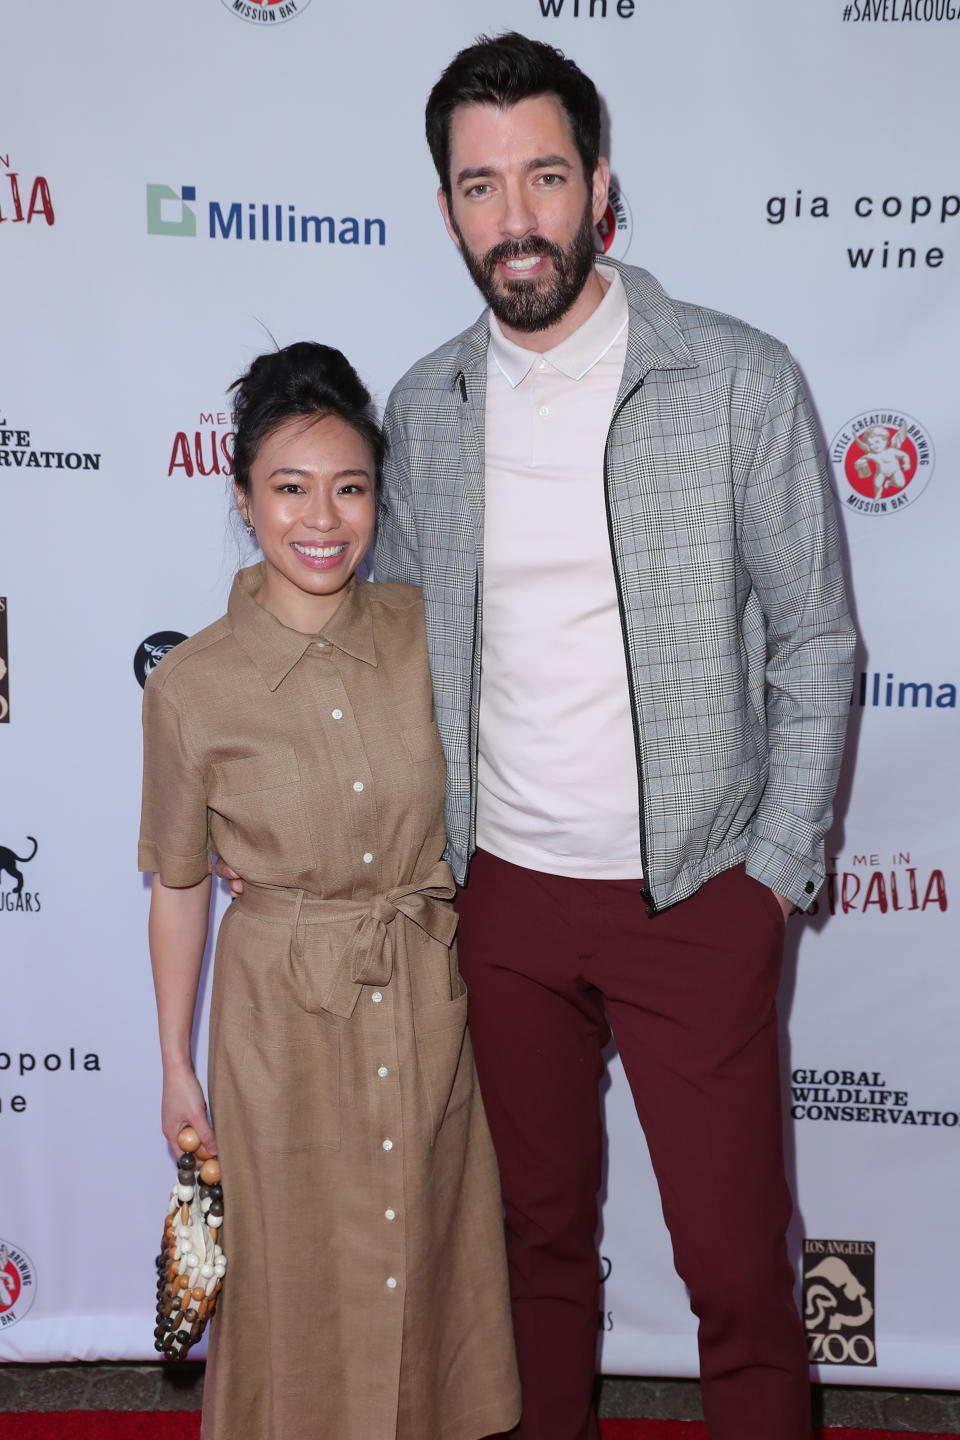 LOS ANGELES, CALIFORNIA - MARCH 08: (L-R)  Linda Phan and Drew Scott attend the Greater Los Angeles Zoo Association hosts "Meet Me In Australia" to benefit Australia Wildfire Relief Efforts at Los Angeles Zoo on March 08, 2020 in Los Angeles, California. (Photo by Leon Bennett/WireImage)